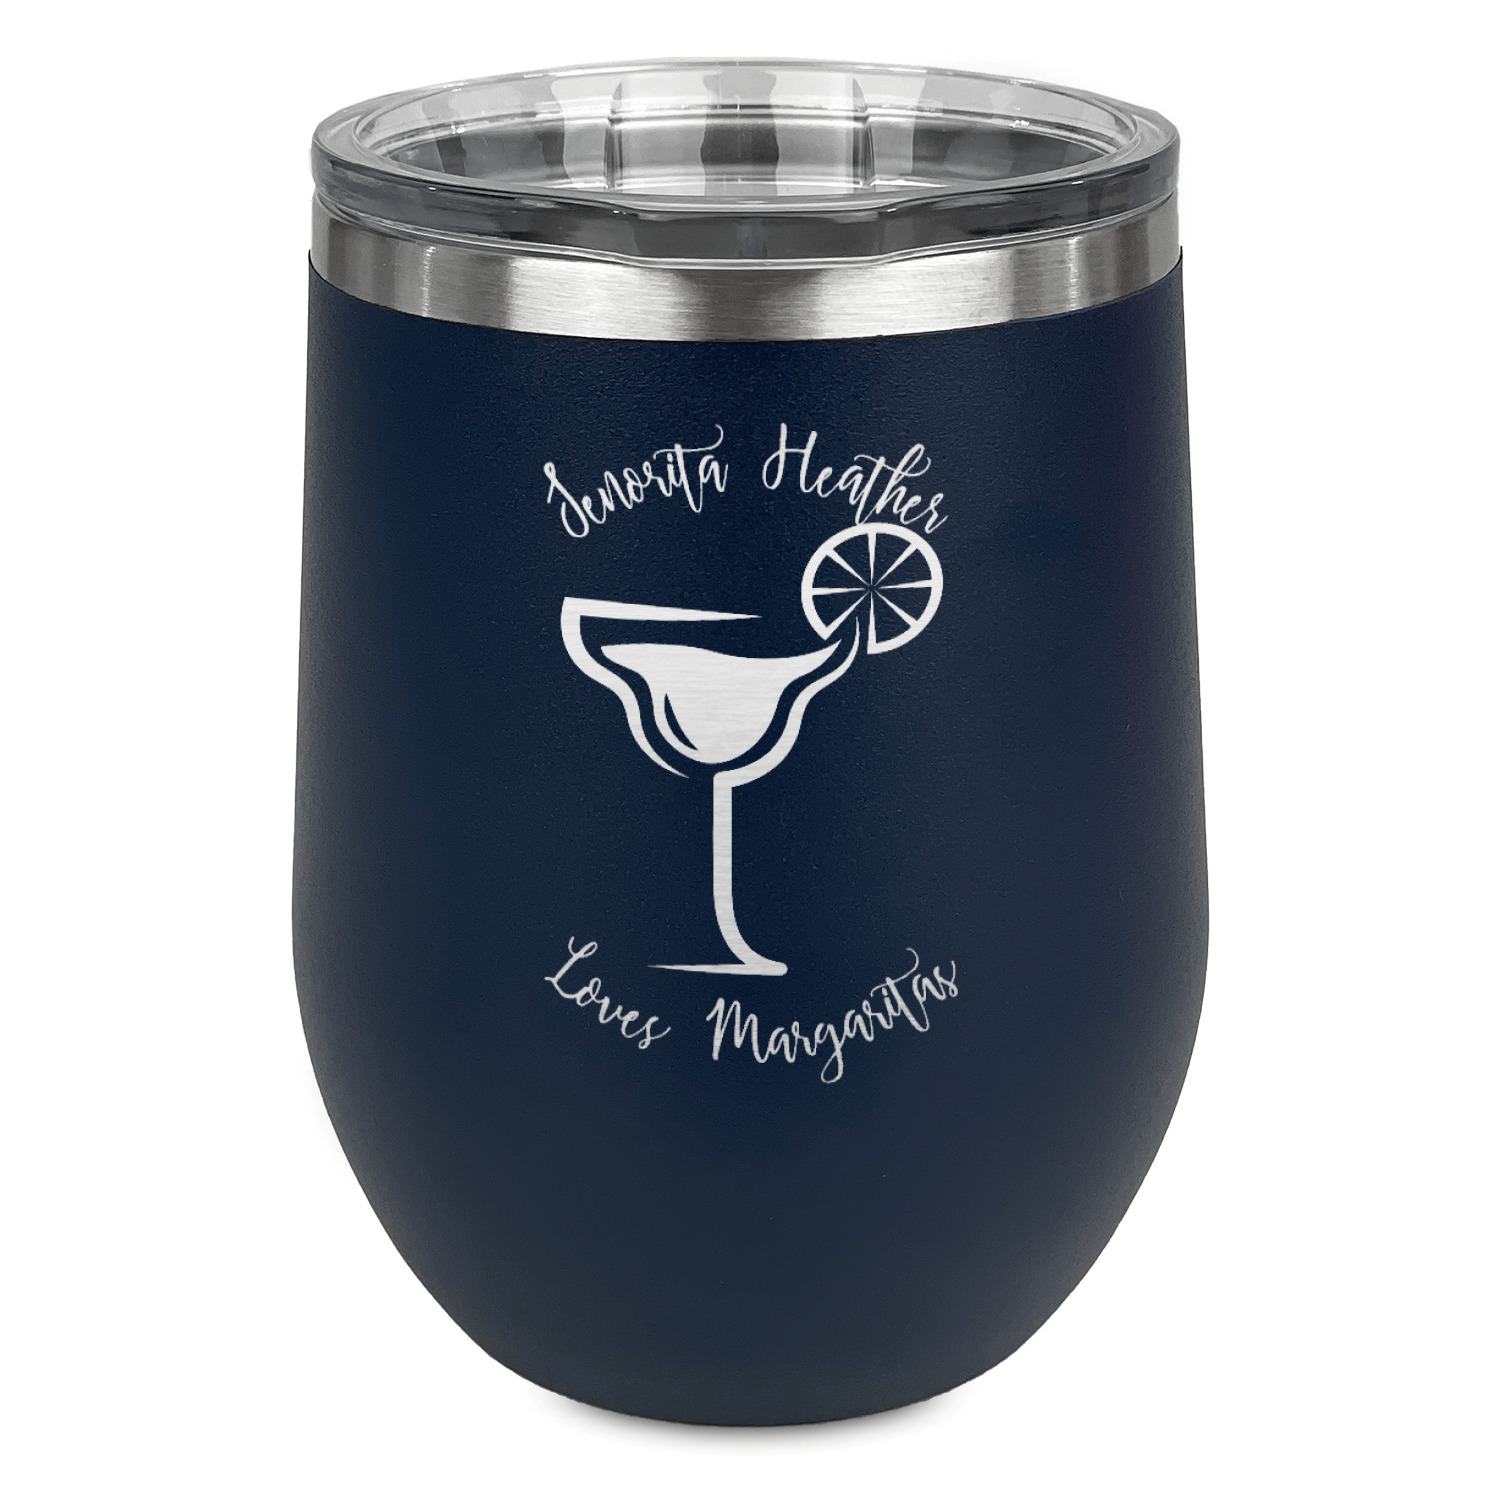 https://www.youcustomizeit.com/common/MAKE/1622723/Margarita-Lover-Stainless-Wine-Tumblers-Navy-Single-Sided-Front.jpg?lm=1644256069